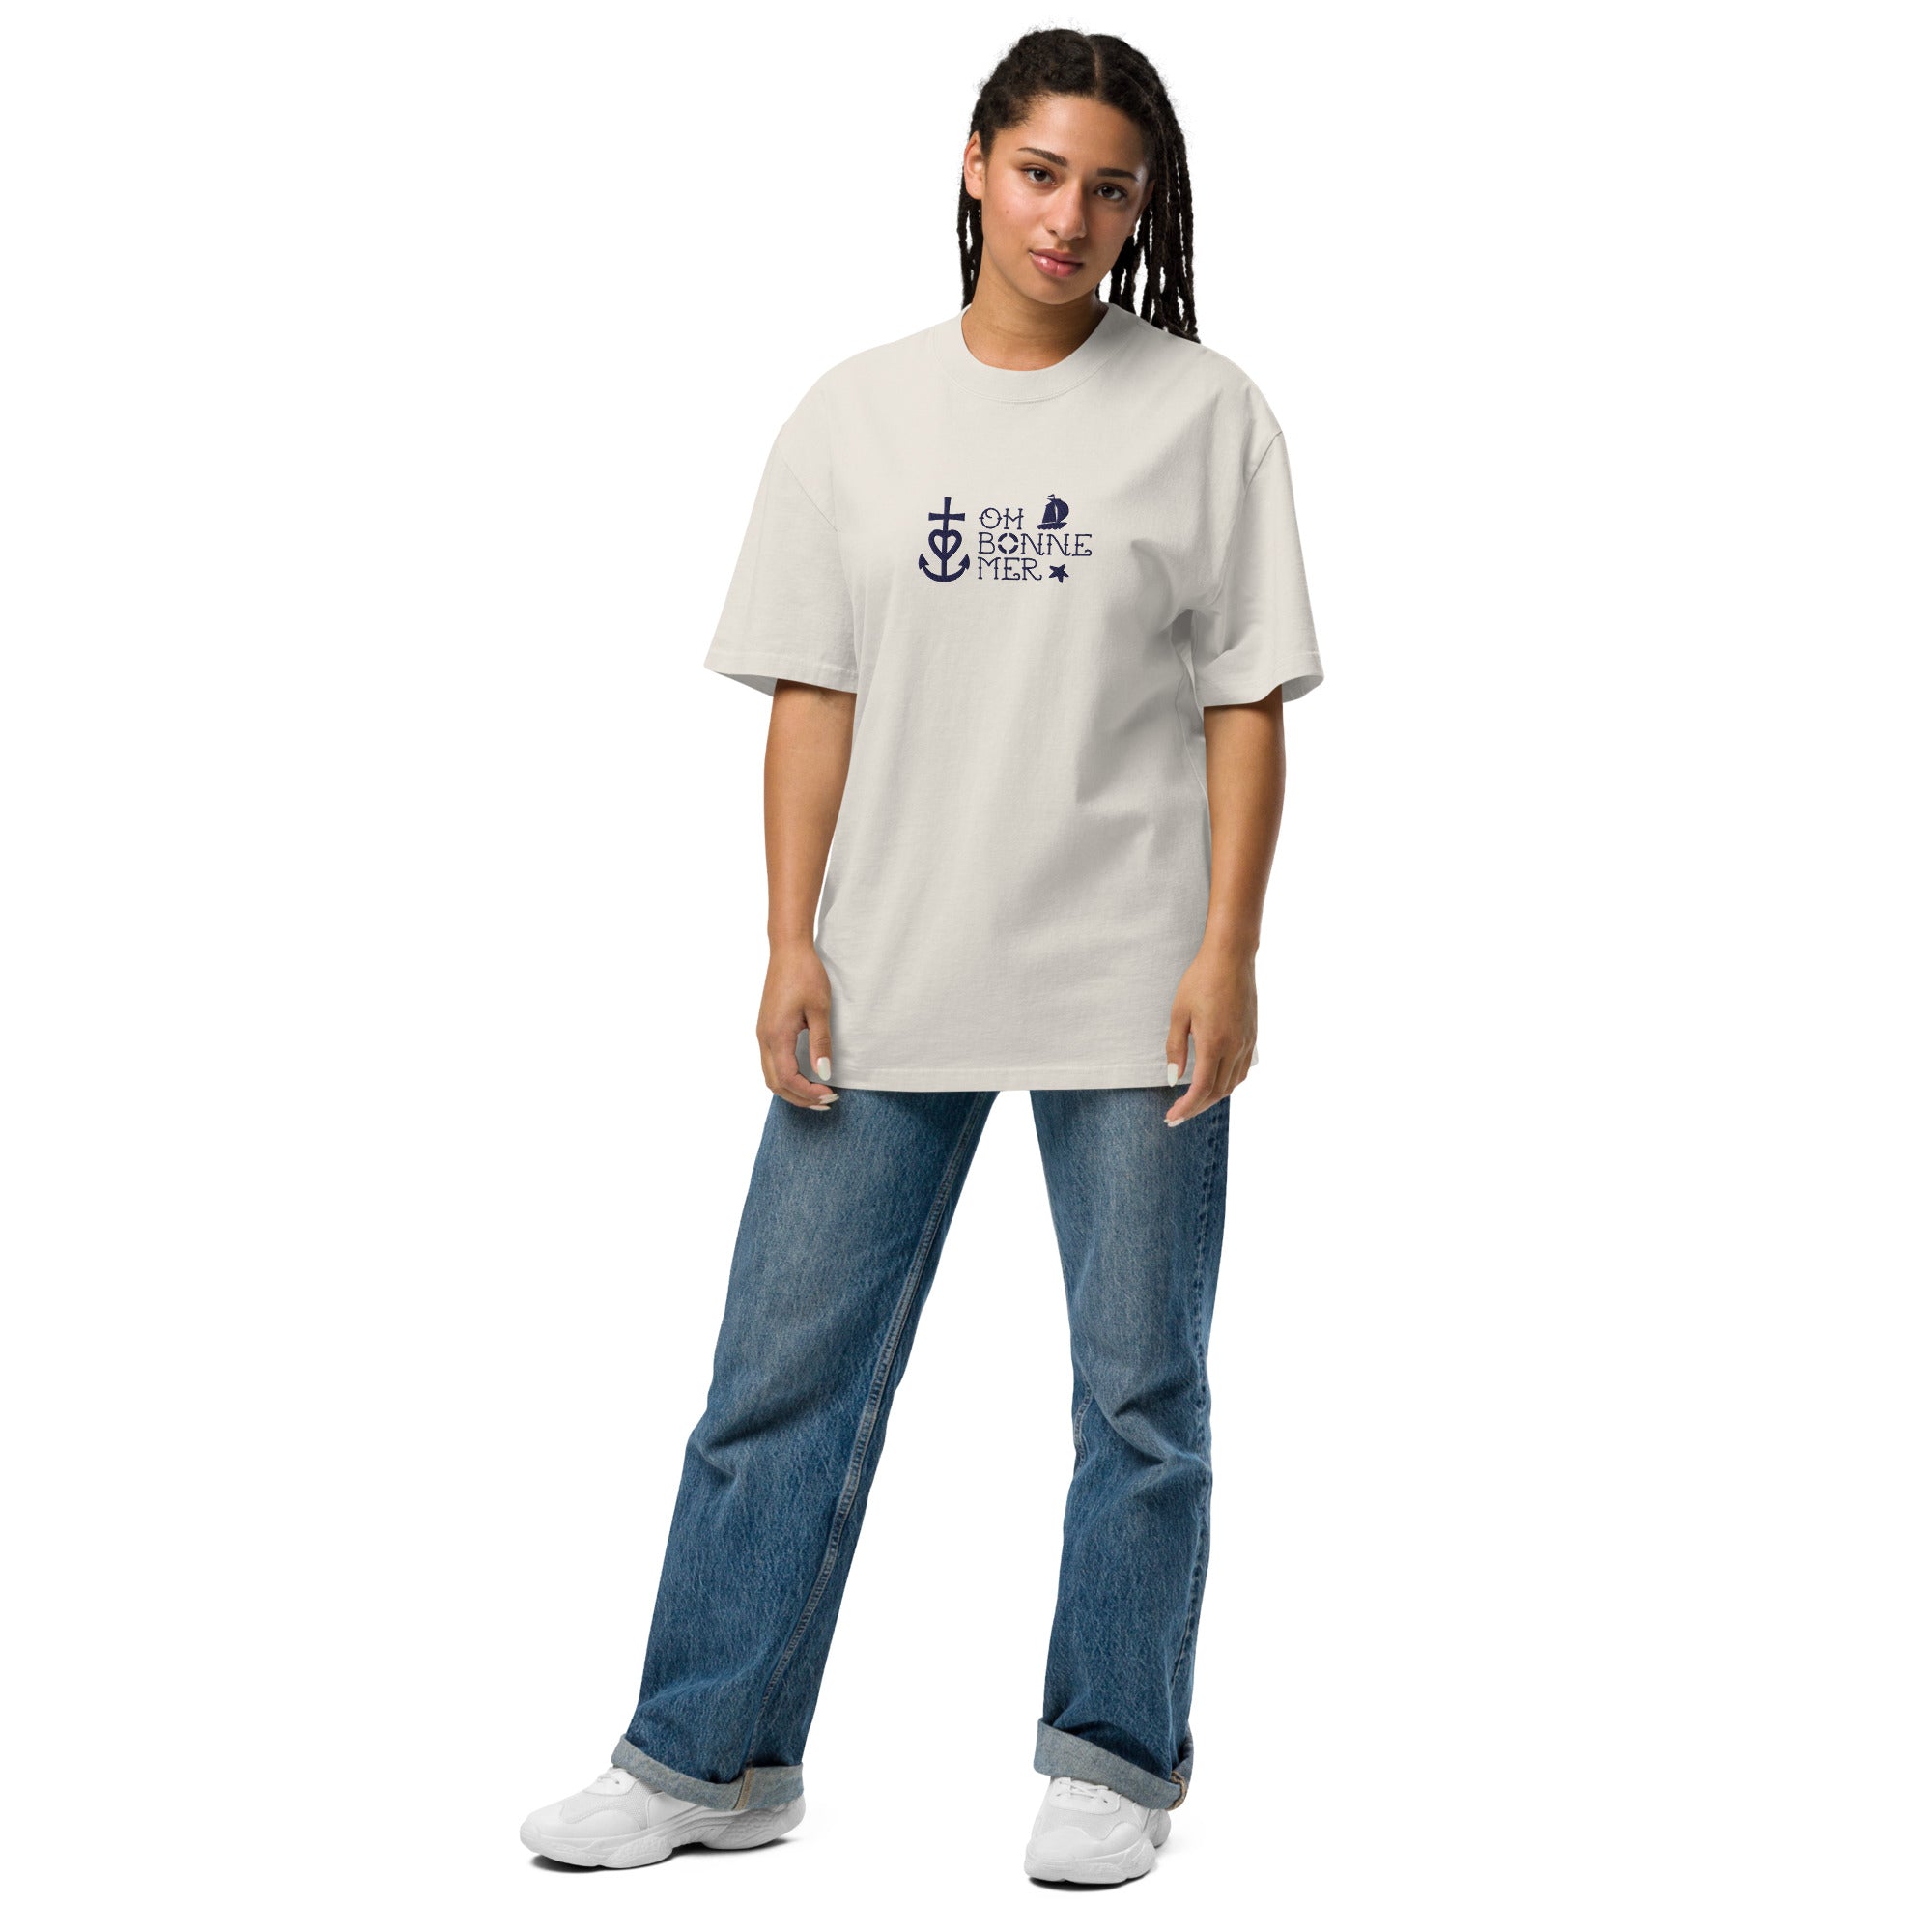 Oversized heavy blend cotton t-shirt Oh Bonne Mer 2 navy embroidered pattern